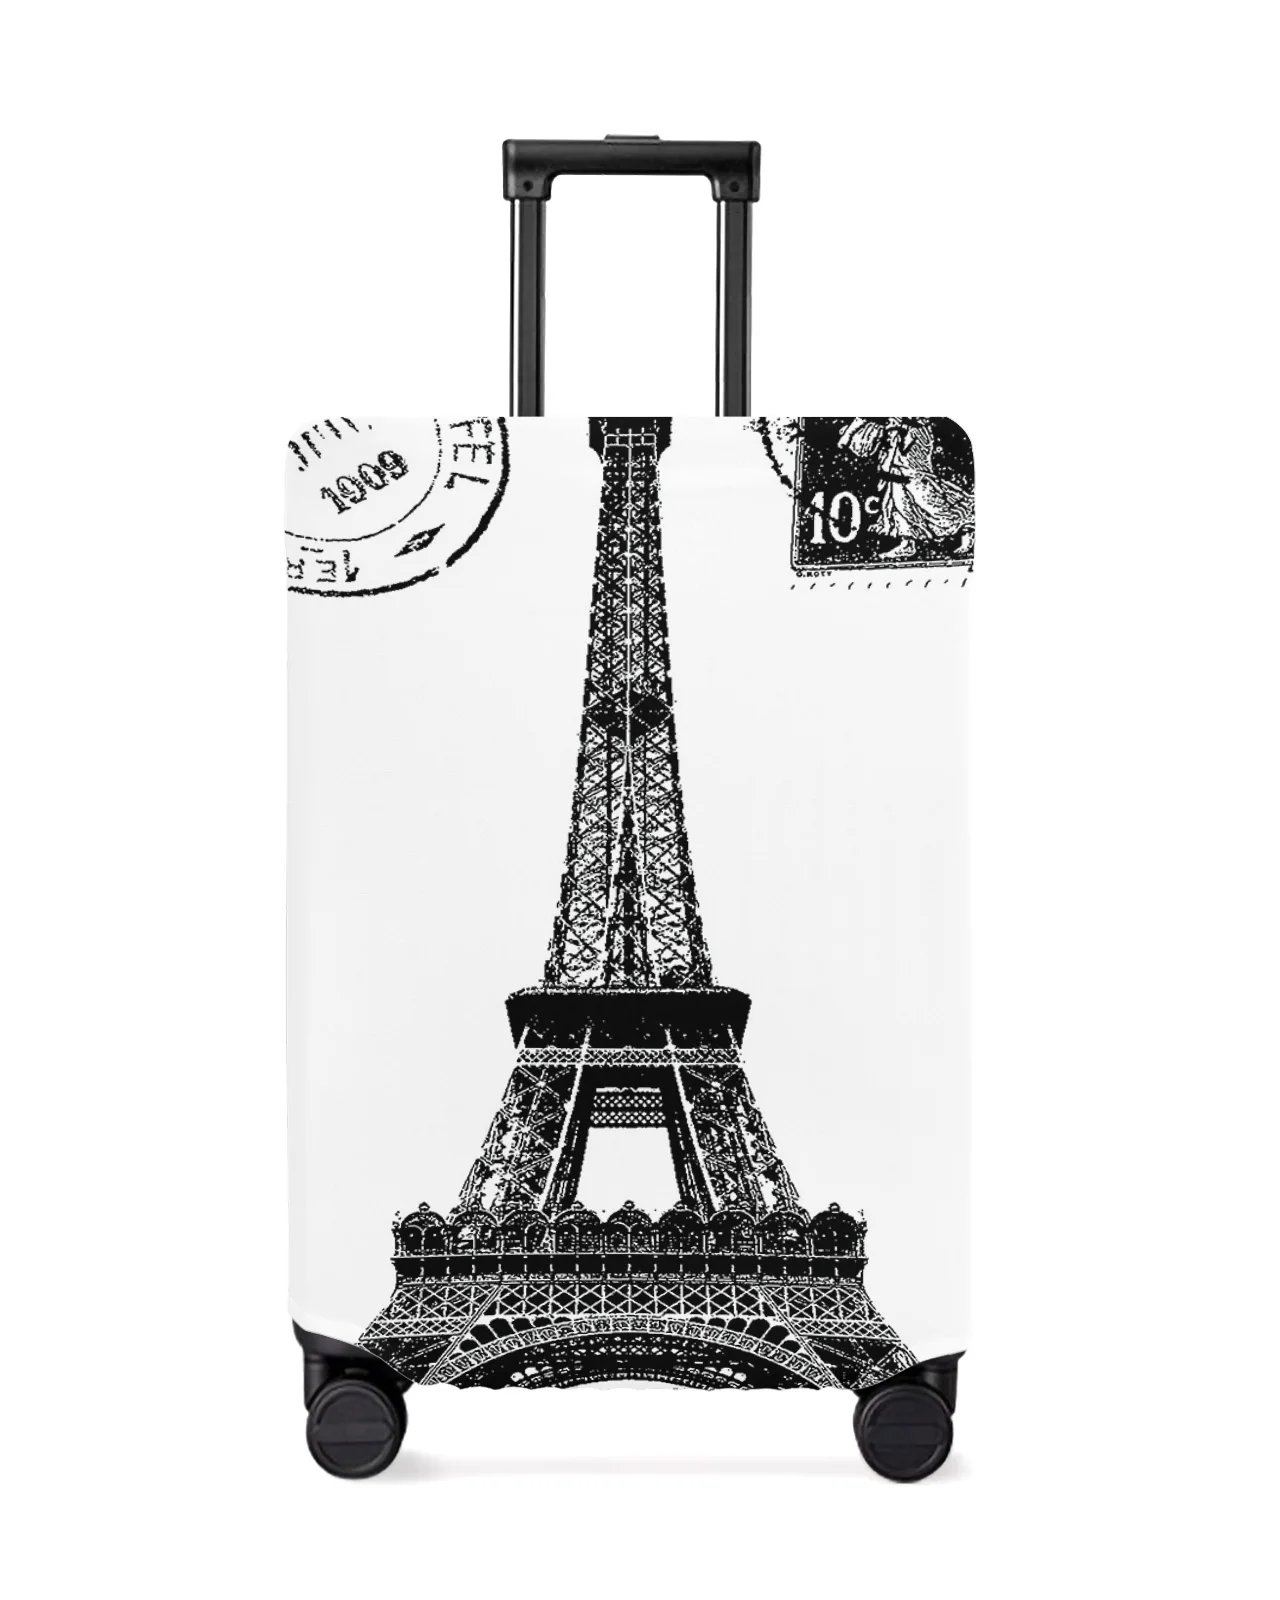 eiffel-tower-retro-vintage-stamp-black-white-luggage-cover-travel-accessories-suitcase-elastic-dust-case-protect-sleeve